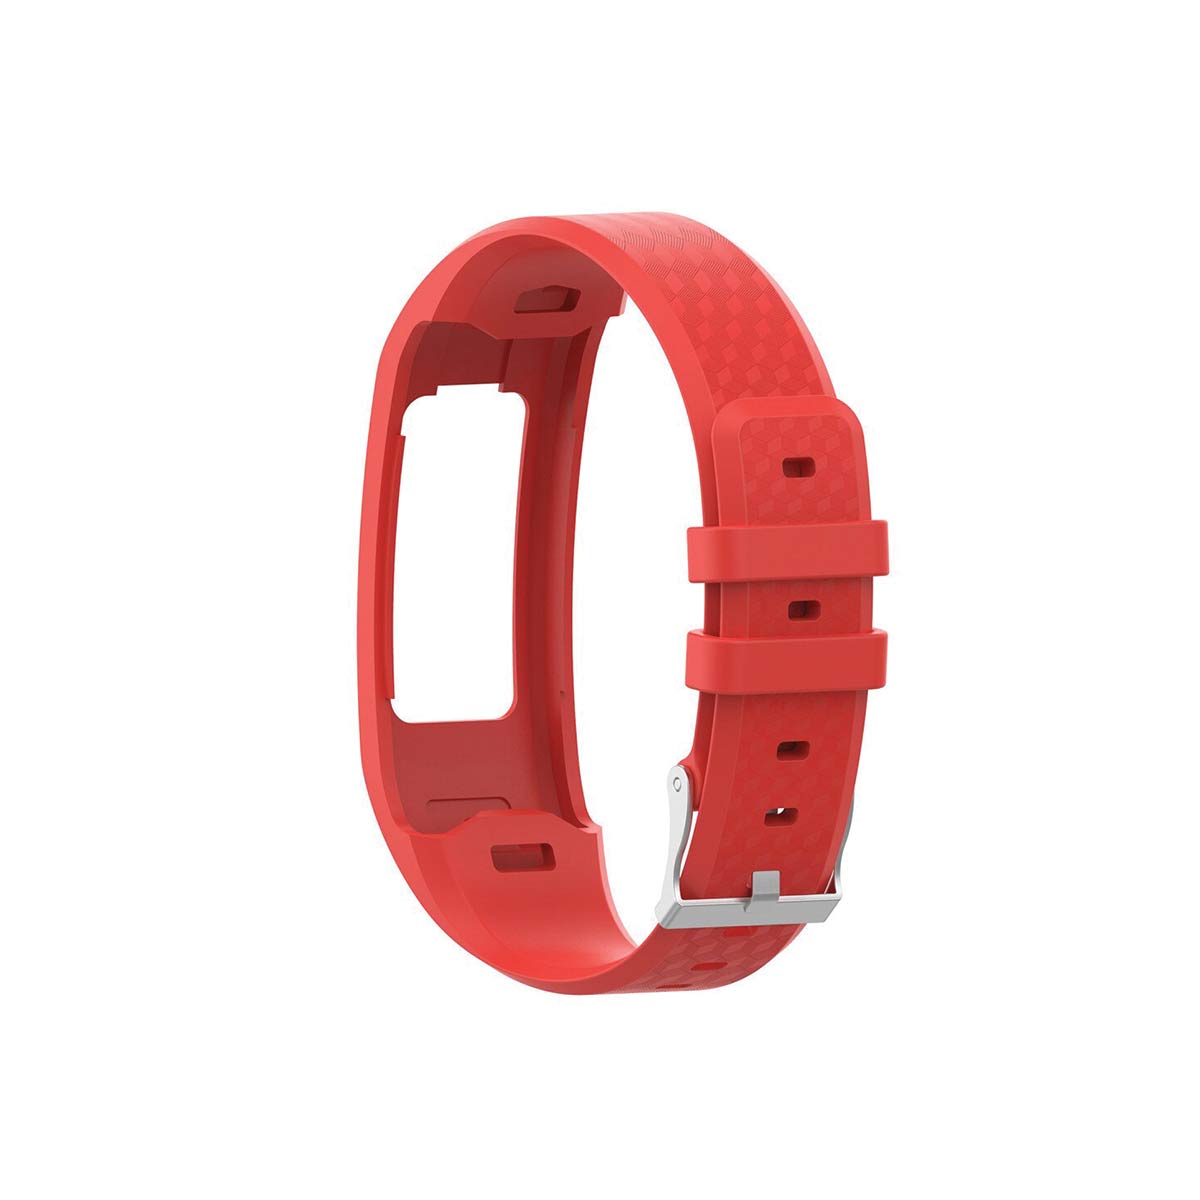 Secure Garmin Vivofit 1 & 2 Band Replacement Strap with Buckle Small Red 